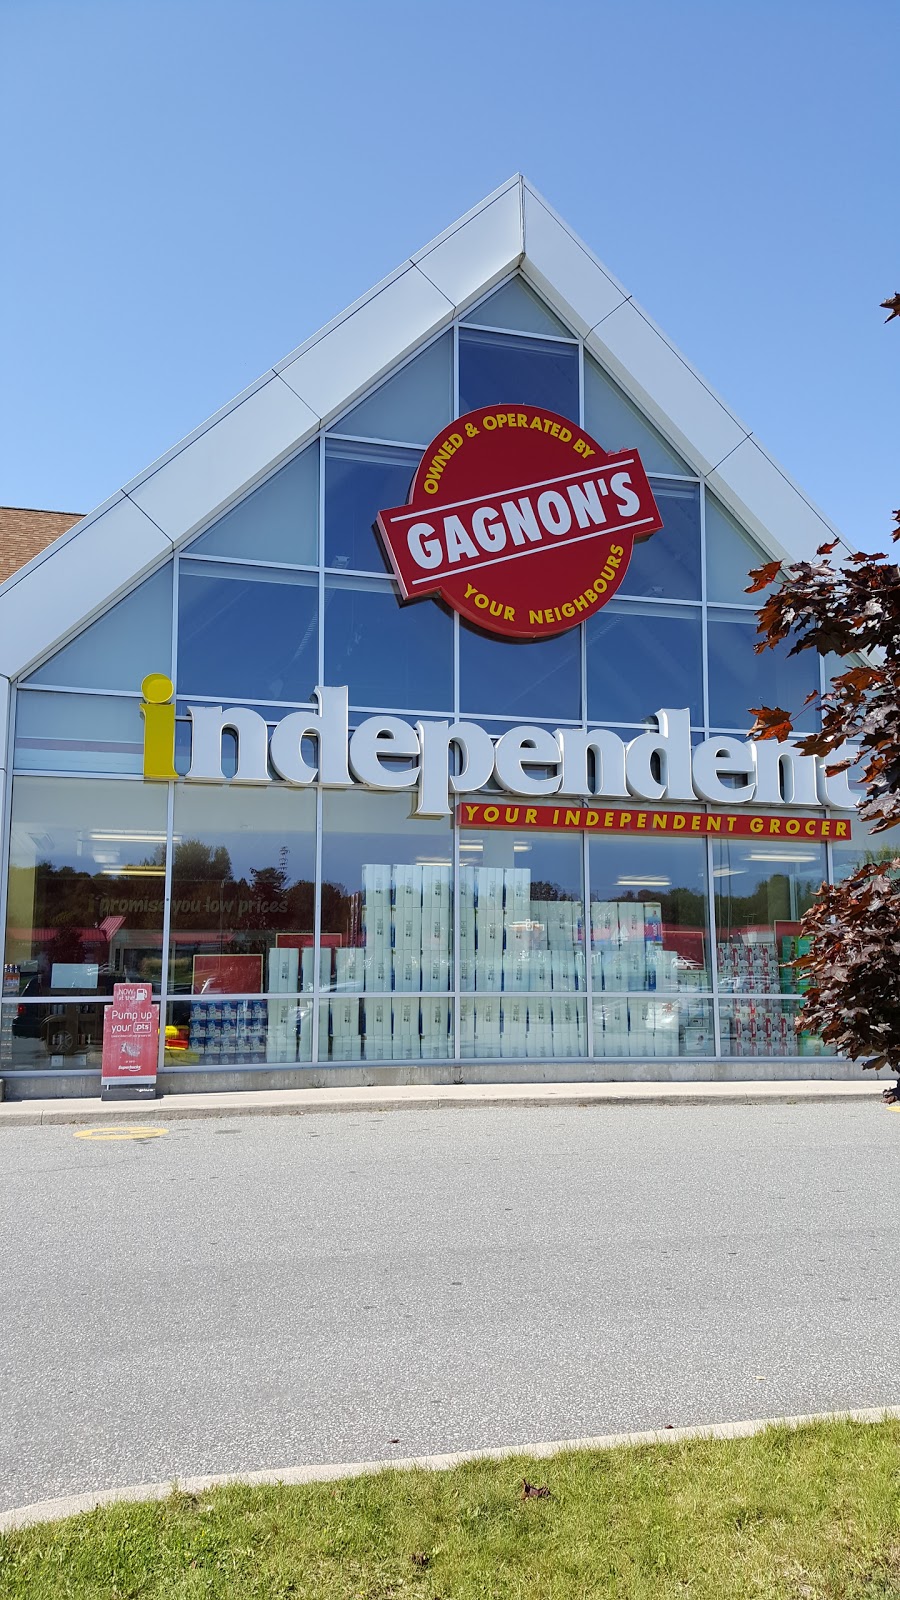 Gagnons Your Independent Grocer | bakery | 270 Wellington St, Bracebridge, ON P1L 1B9, Canada | 7056461412 OR +1 705-646-1412